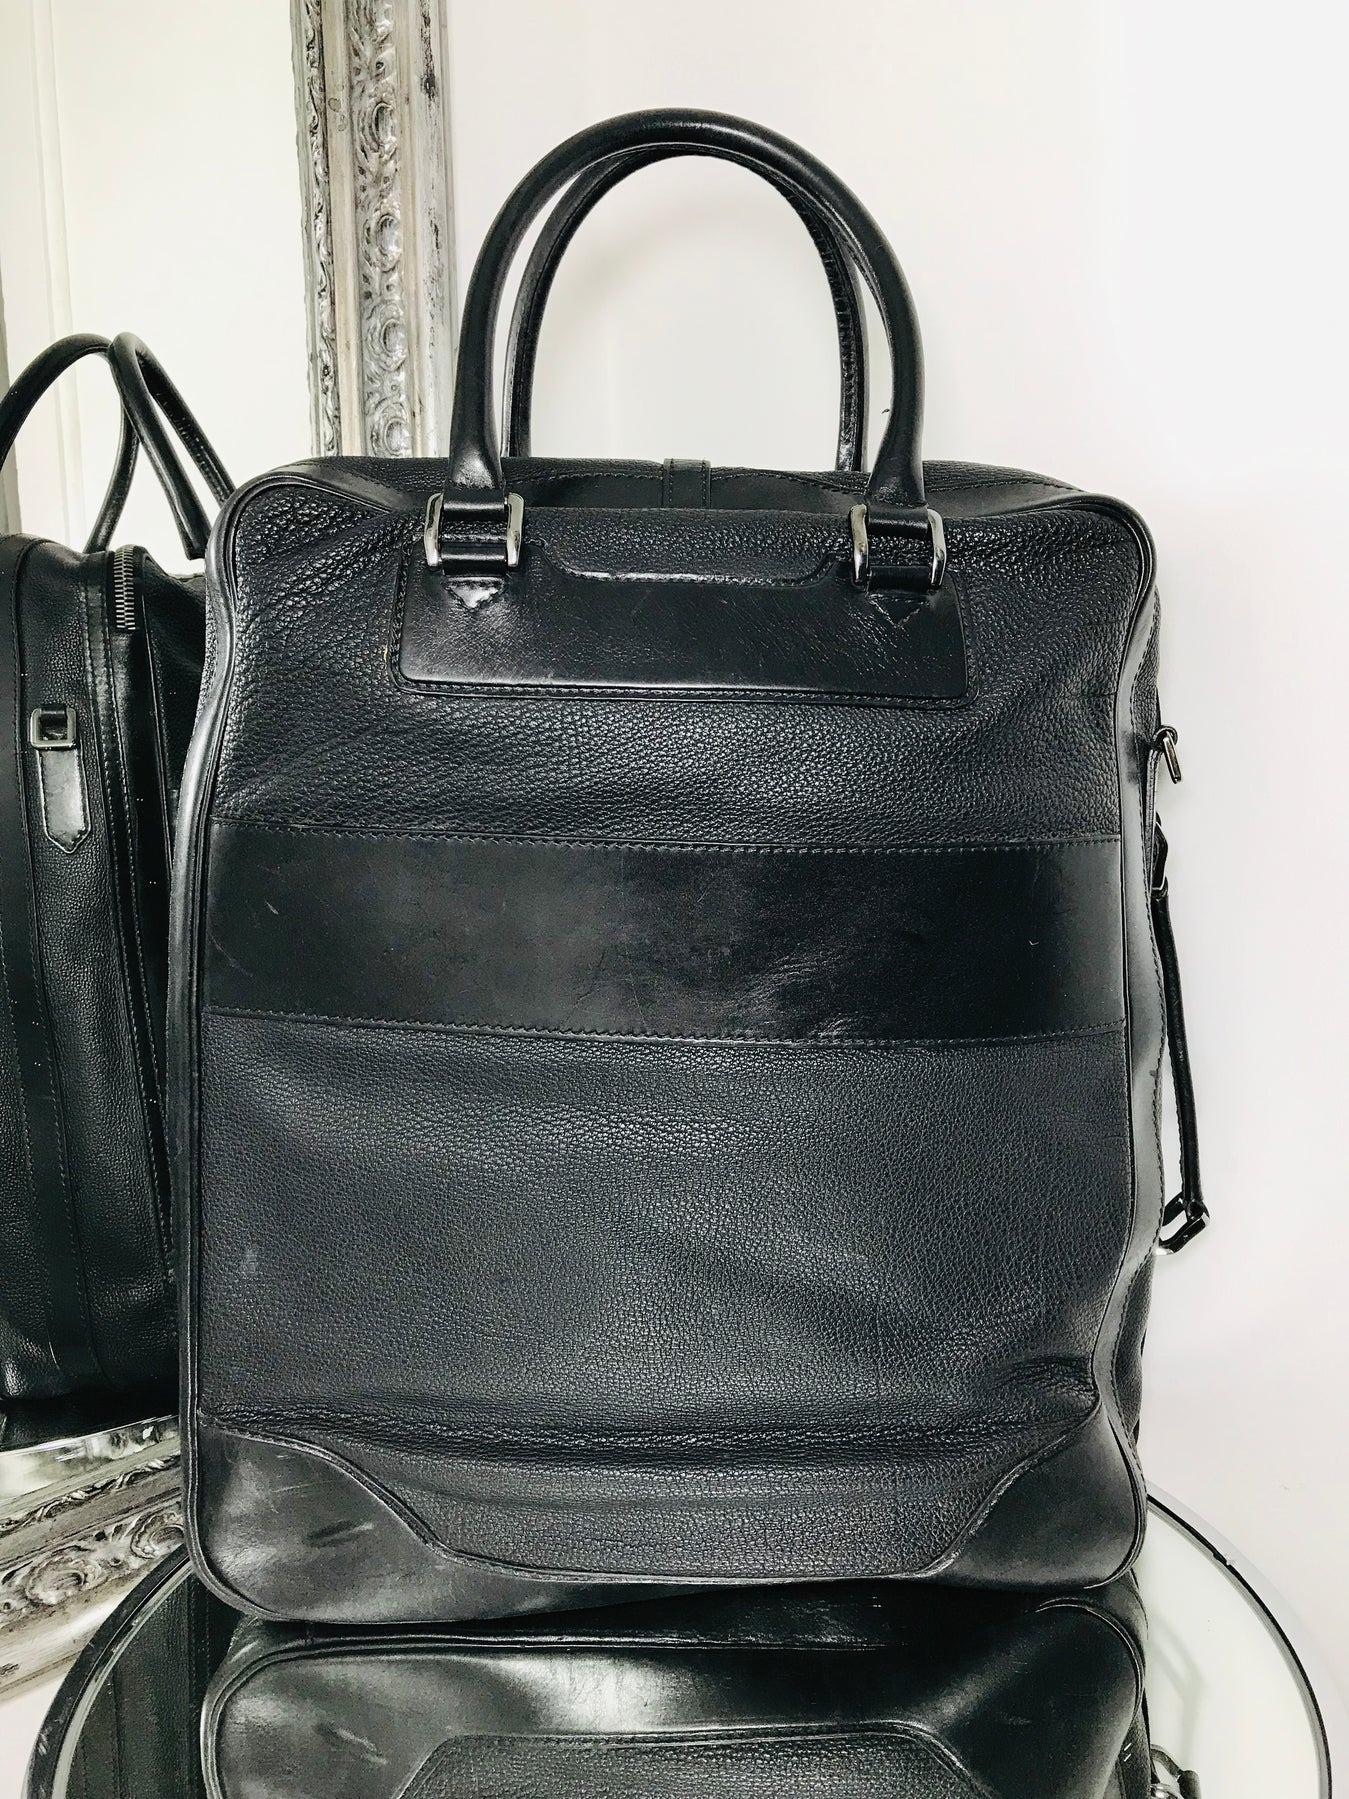 Burberry Large Leather Travel Bag In Good Condition For Sale In London, GB